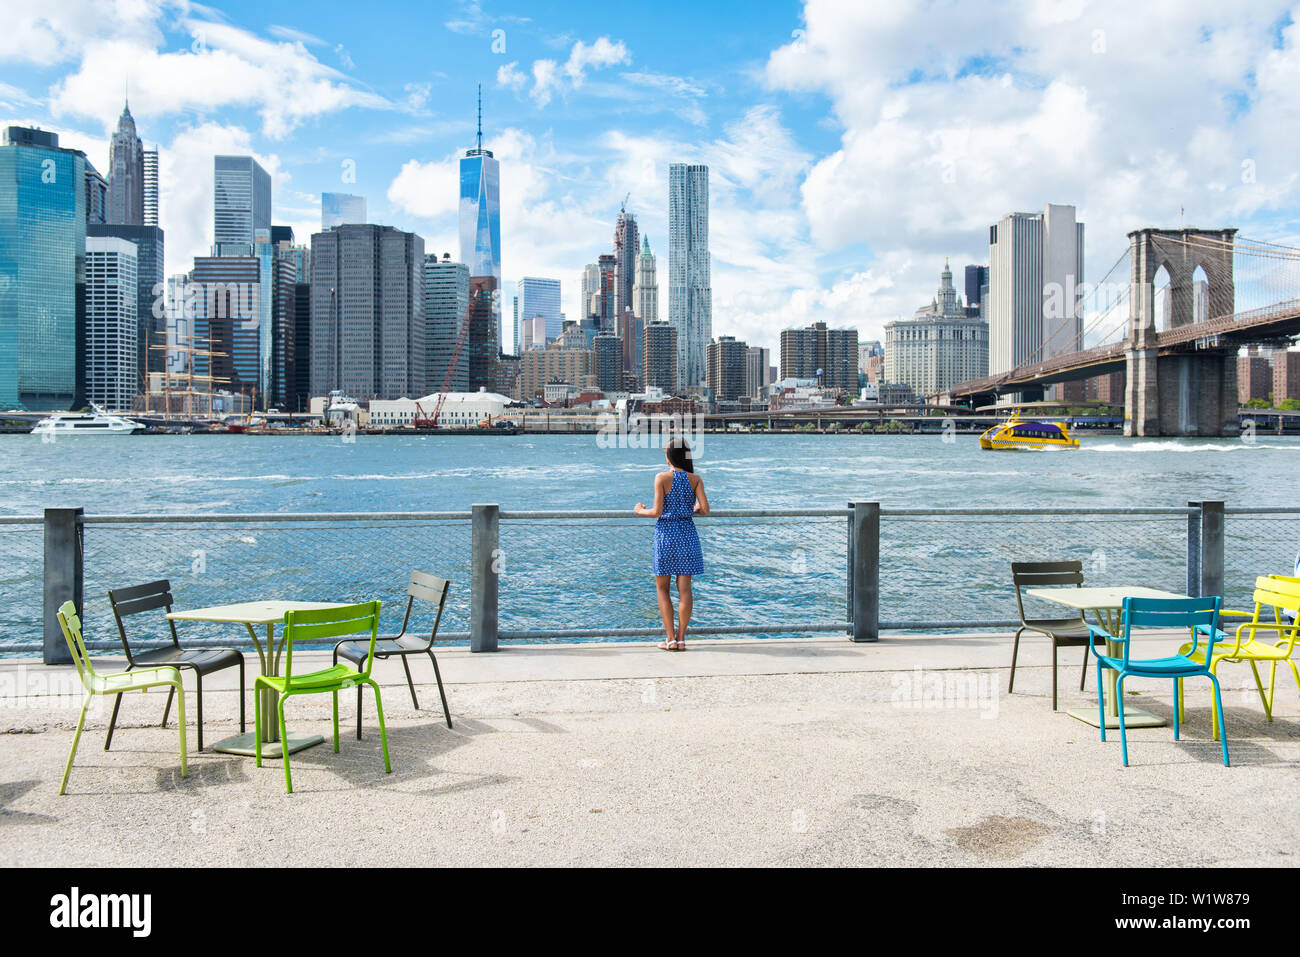 New York city skyline waterfront lifestyle - American people walking enjoying view of Manhattan over the Hudson river from the Brooklyn side. NYC cityscape with a public boardwalk with tables. Stock Photo